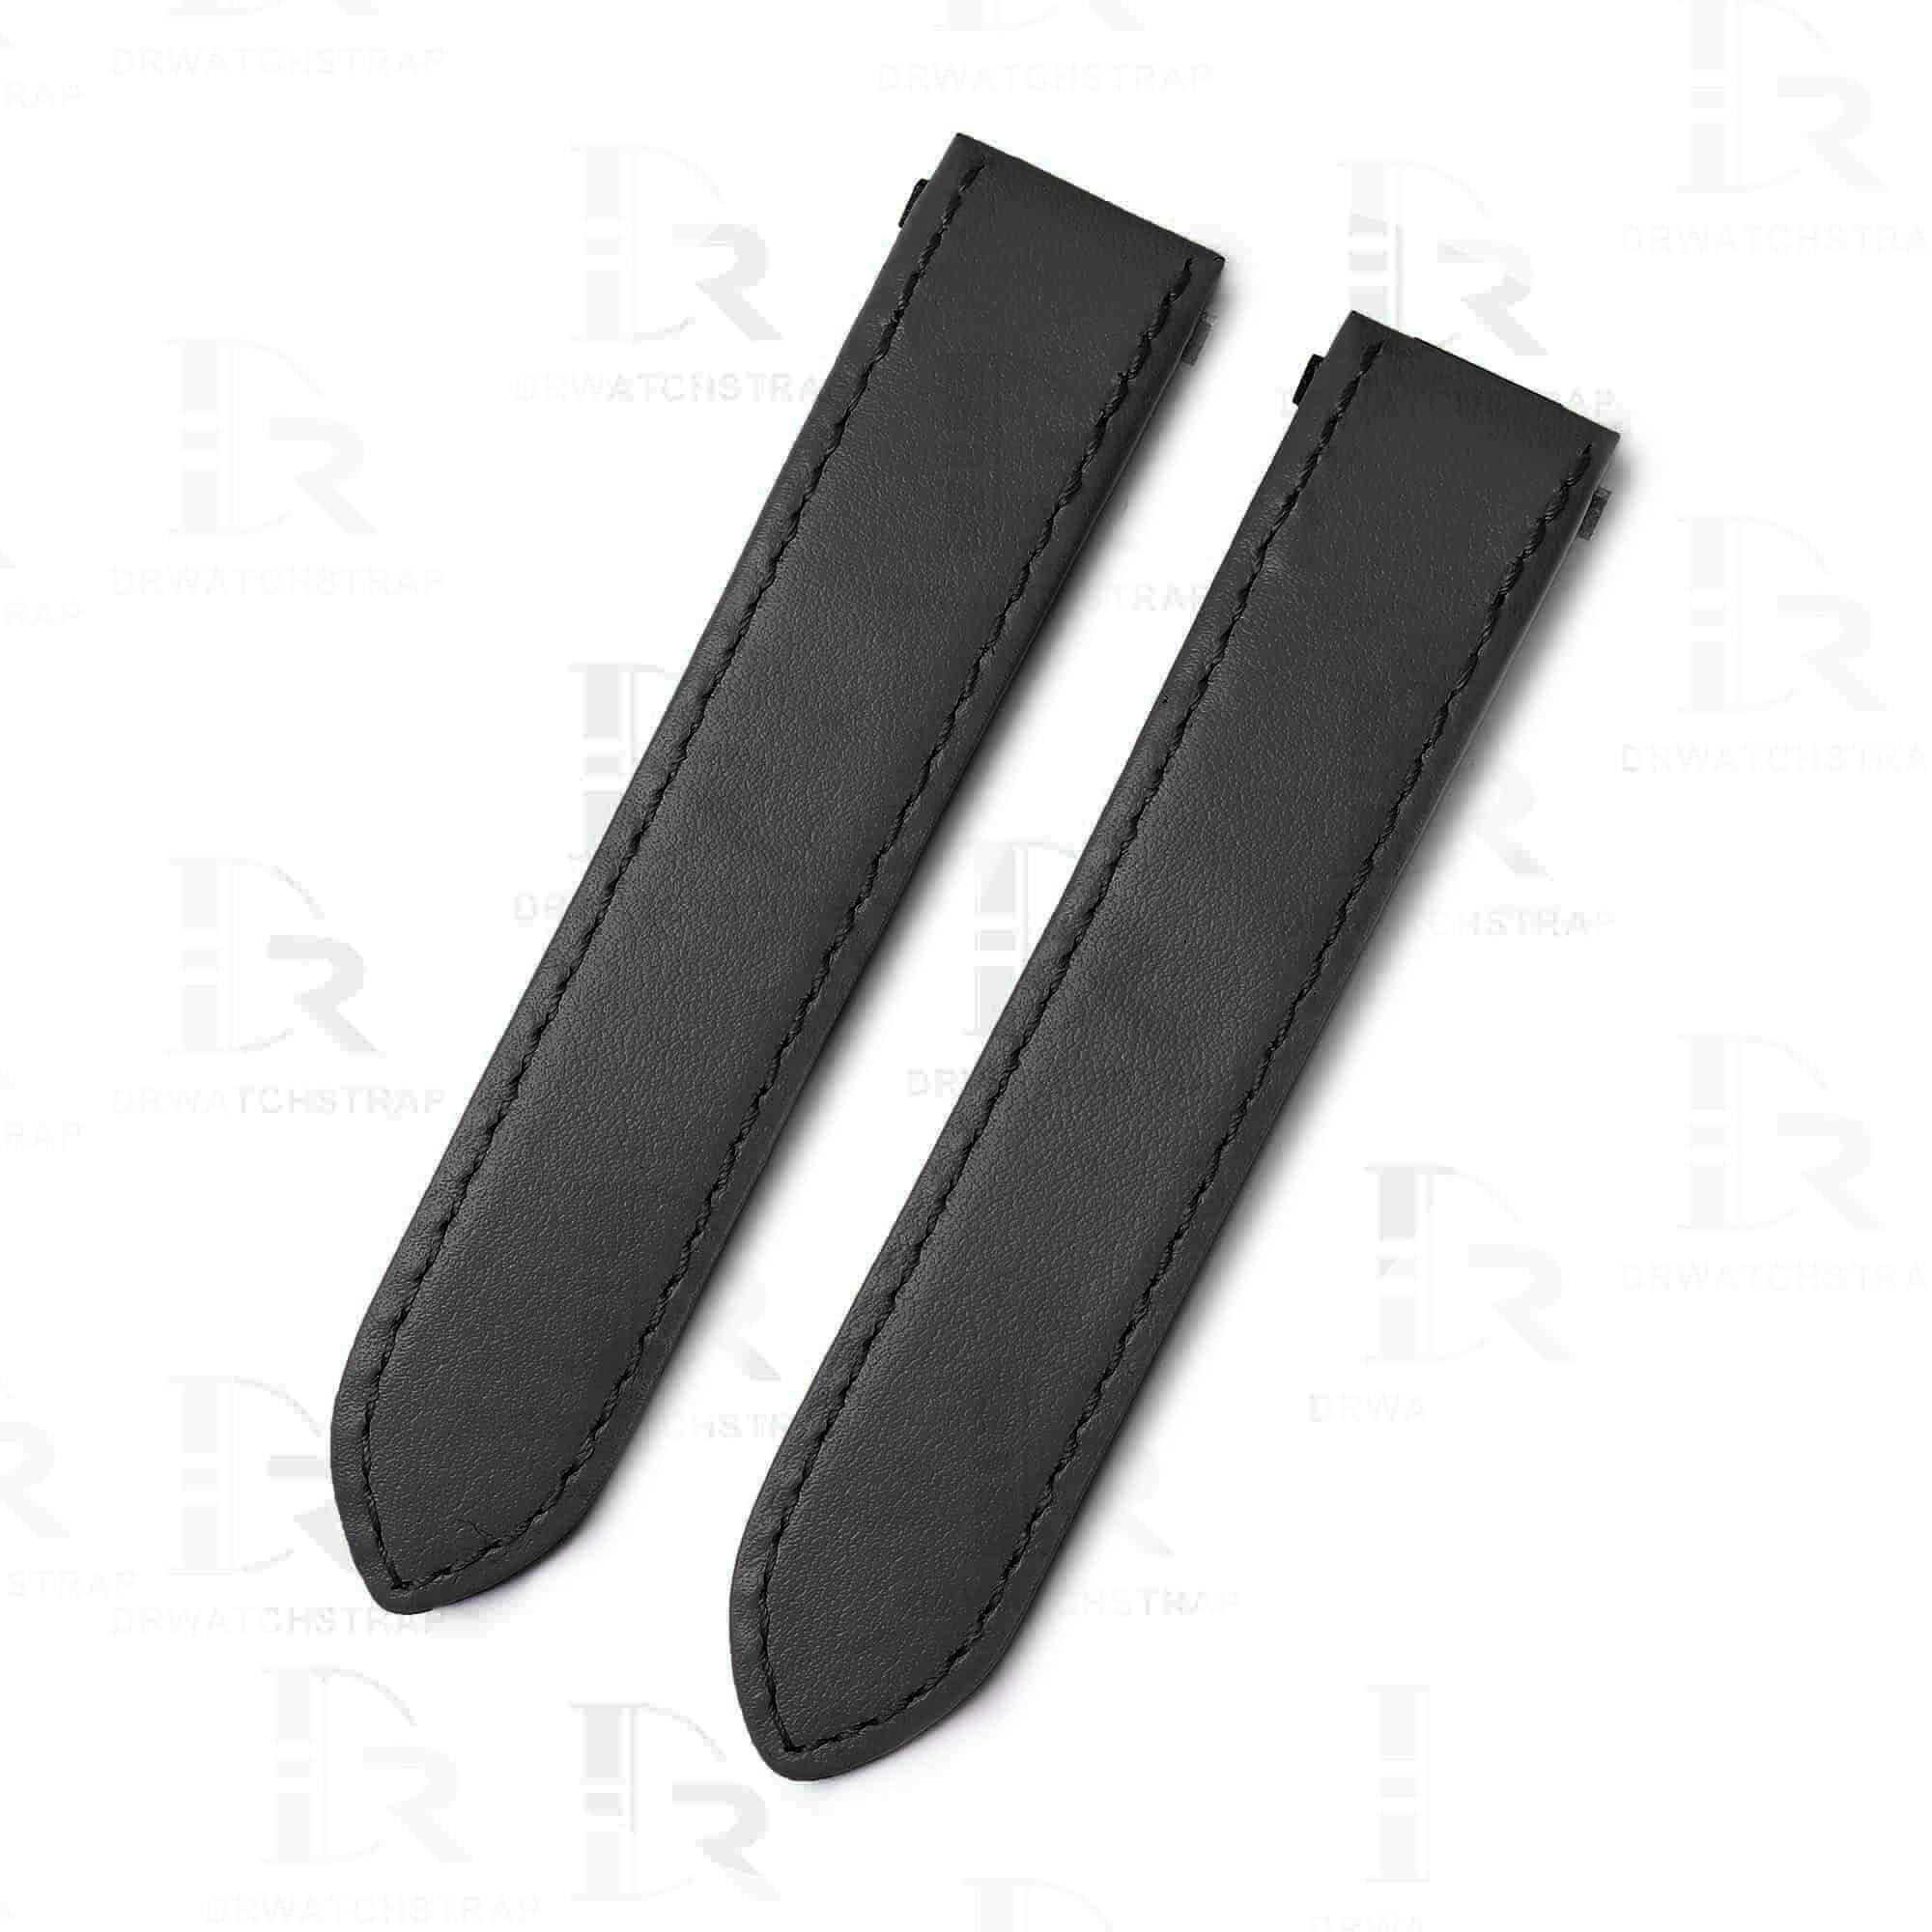 Custom replacement black calfskin leather watchbands for Cartier Roadster strap